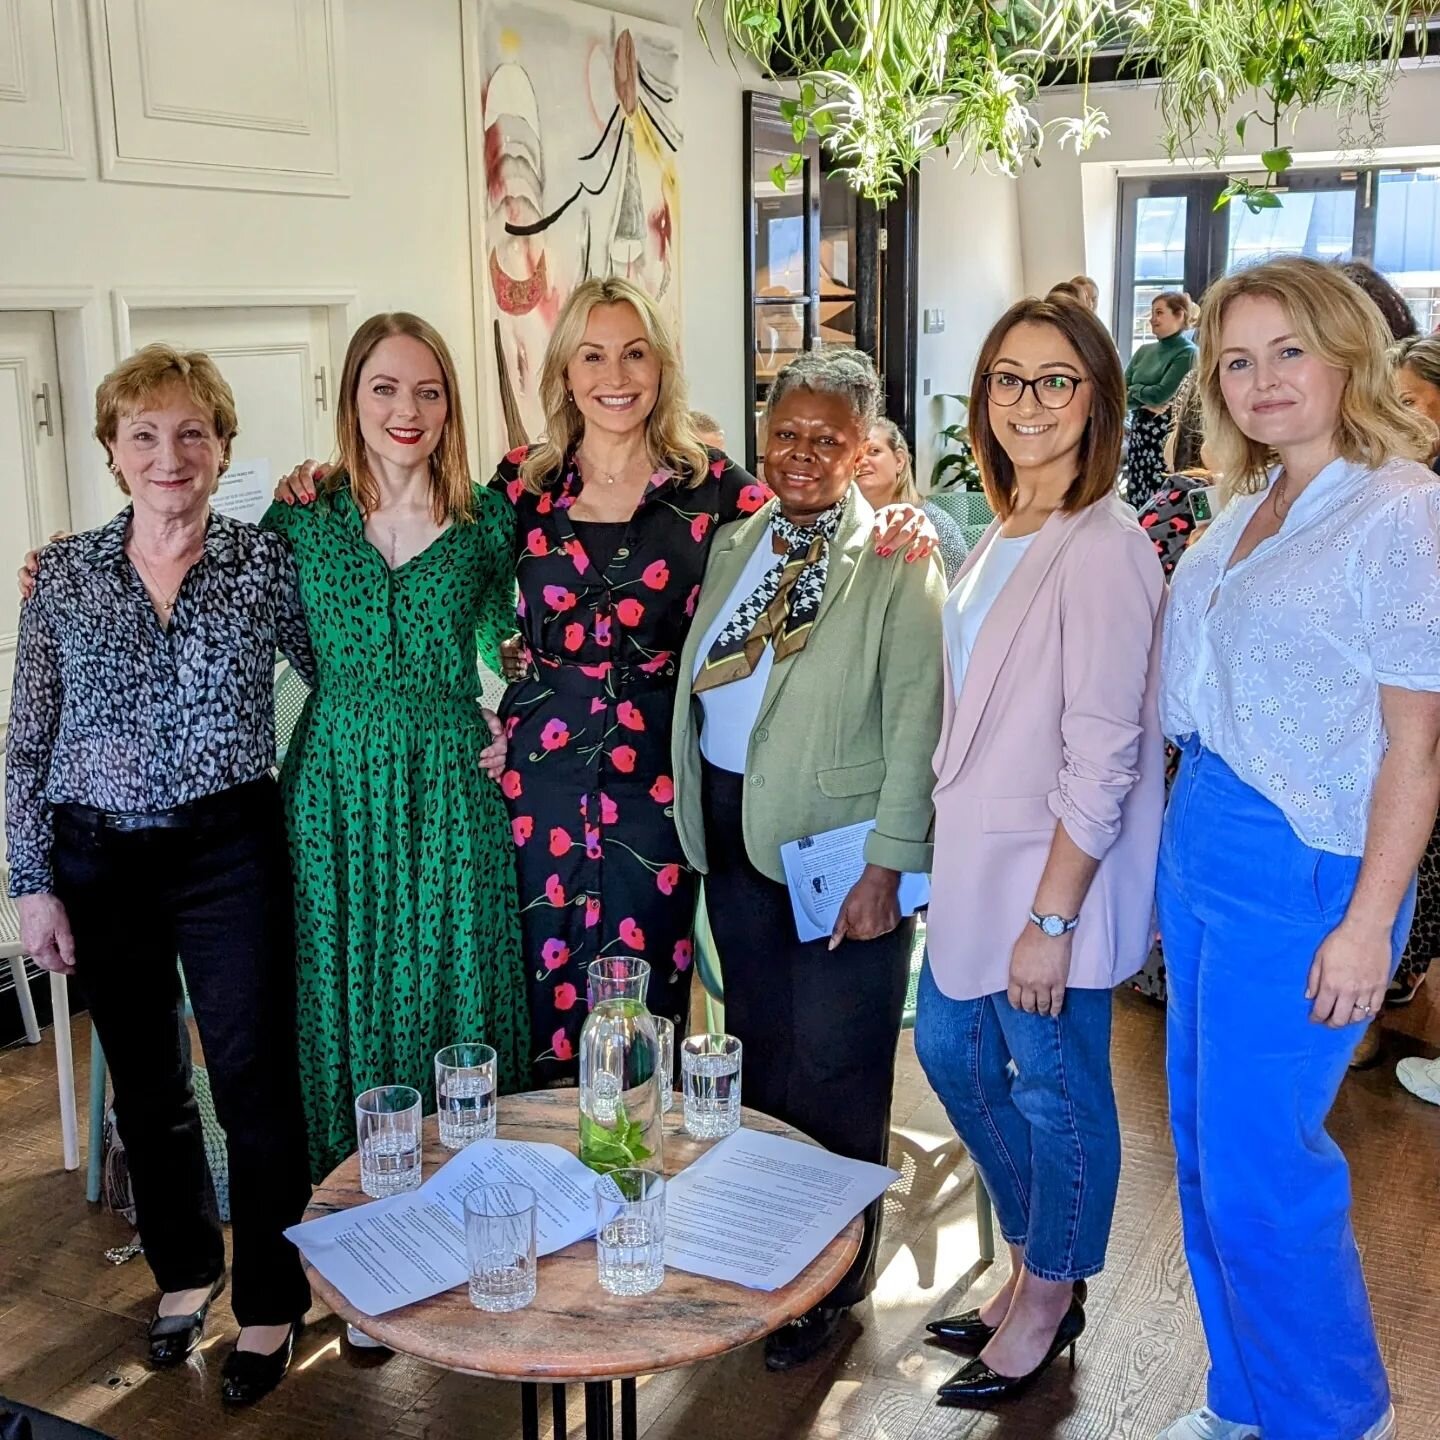 I was honoured to speak at an event about navigating work and breast cancer for @breastcancernow today.

This is such an important (and often overlooked) topic and there are so many aspects we need to discuss, from how to earn a living when you have 